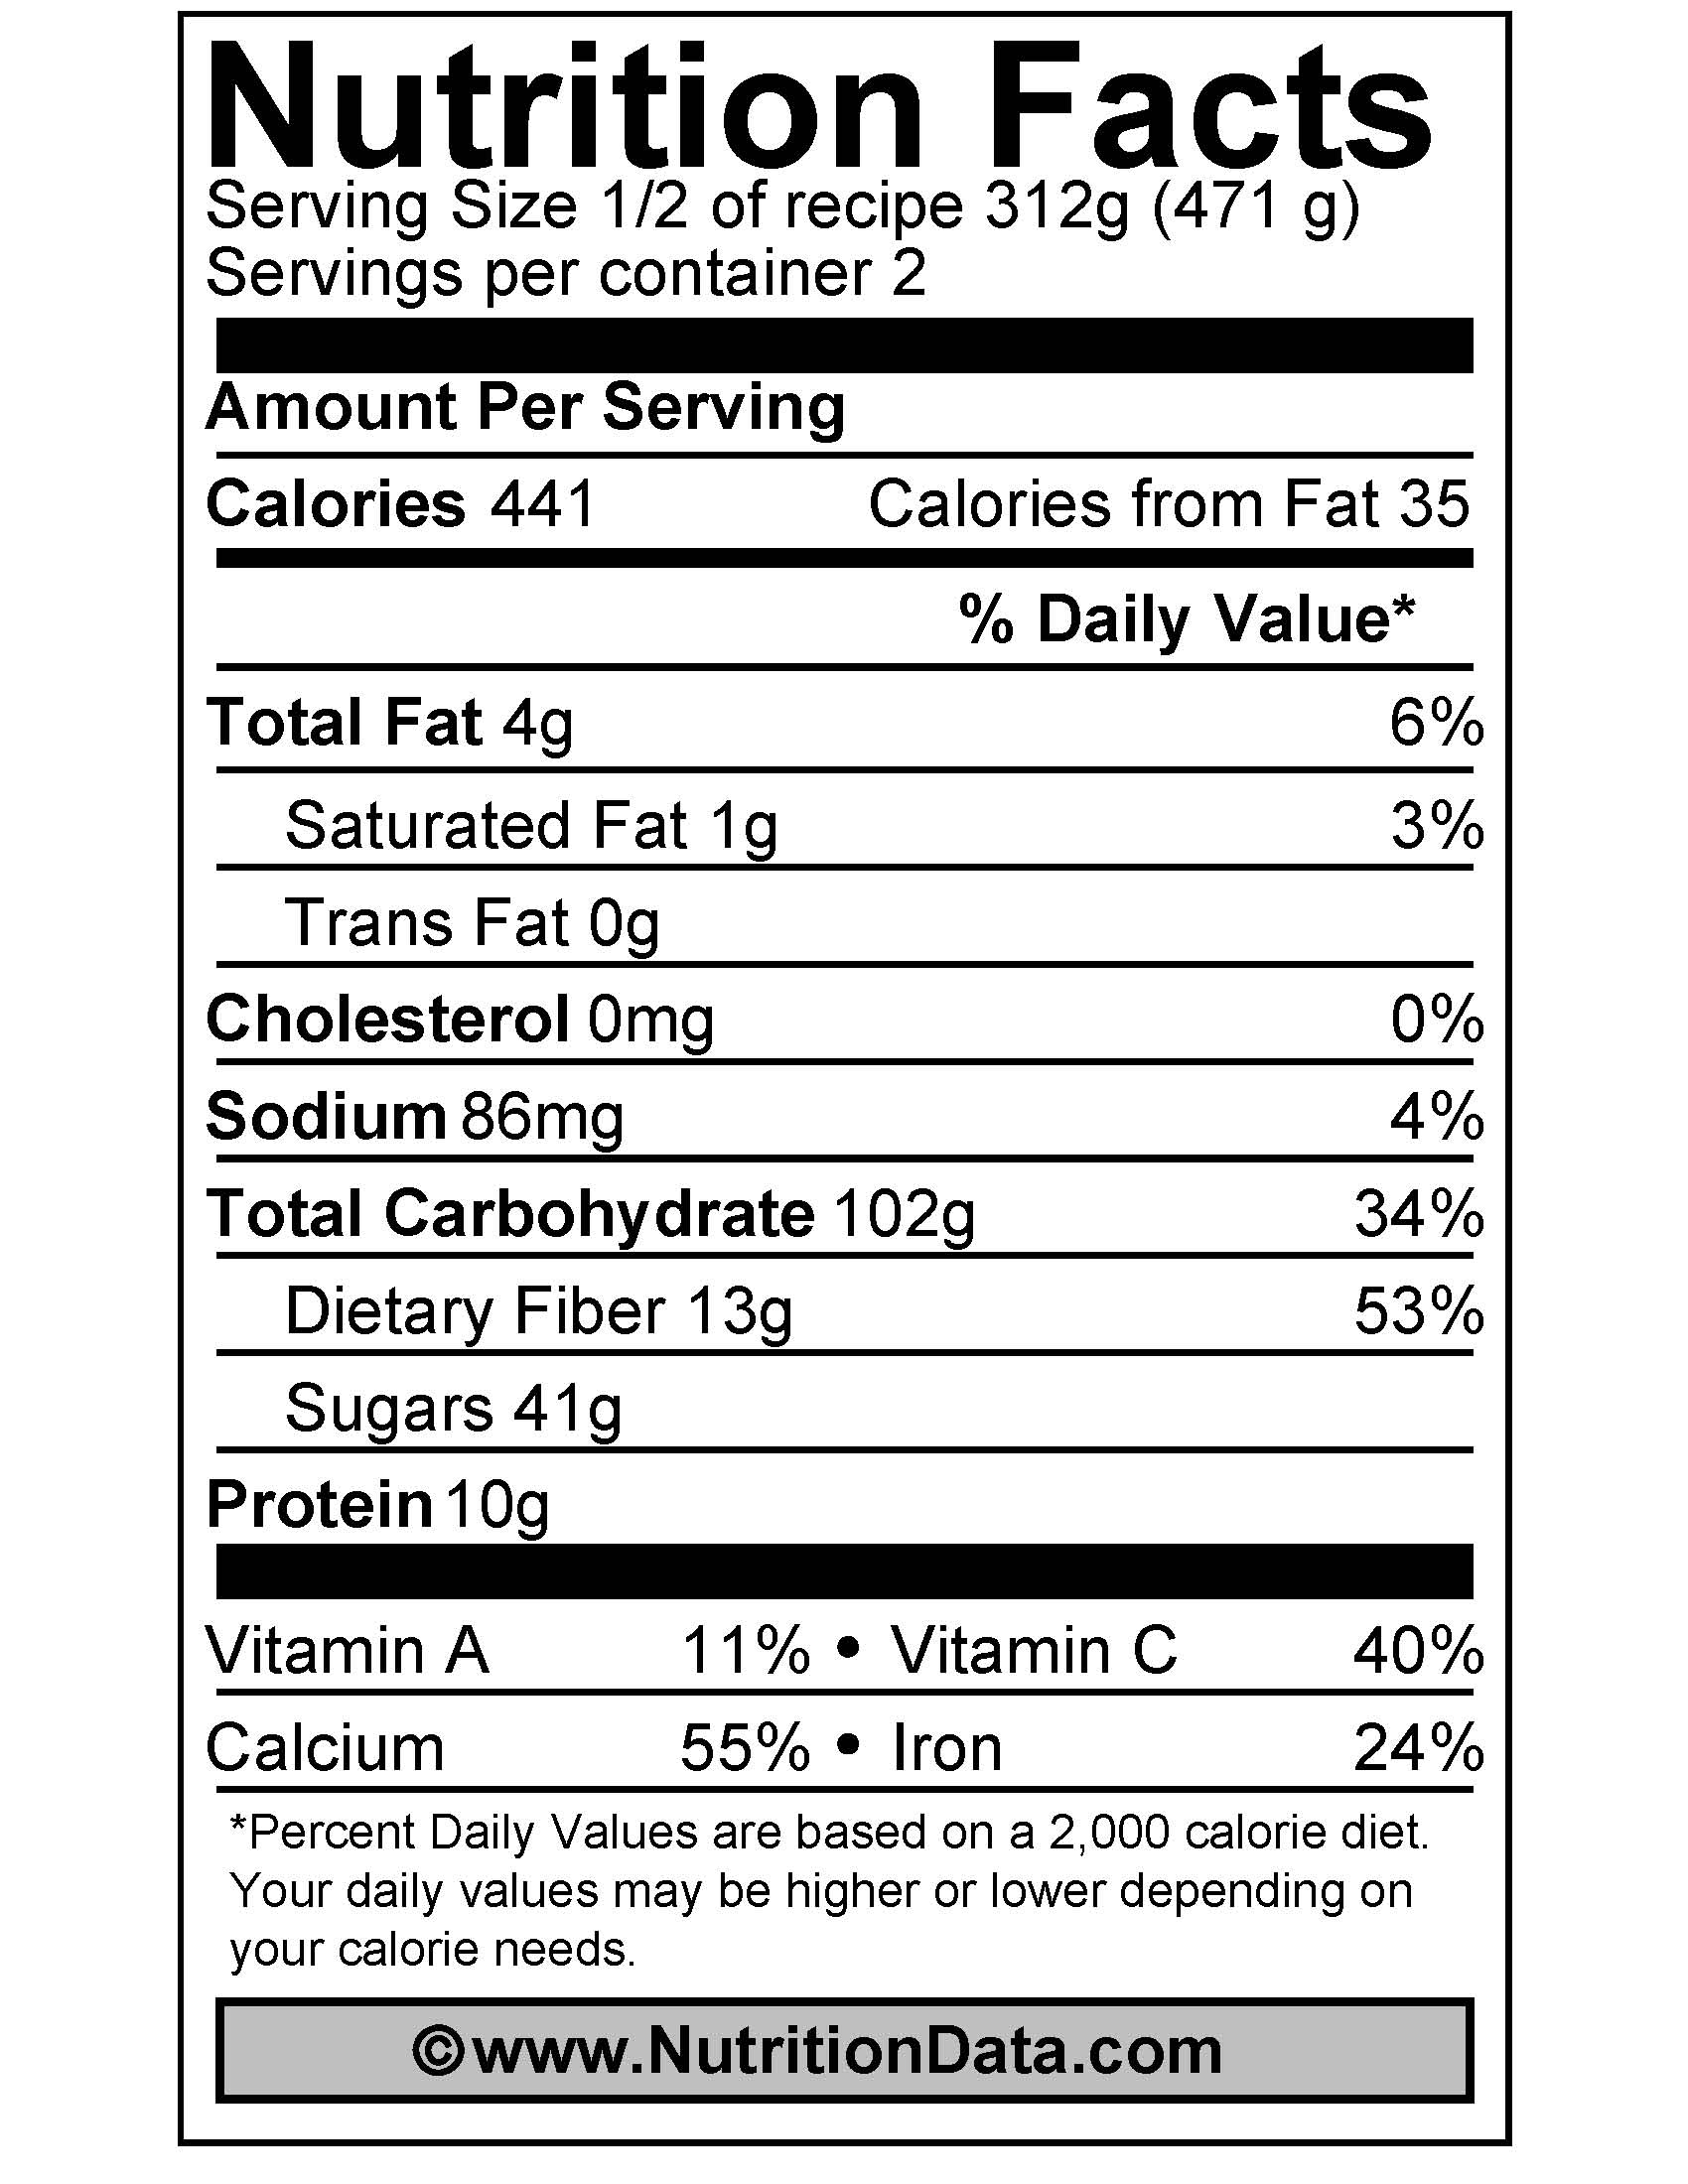 Blueberry Nutrition Facts